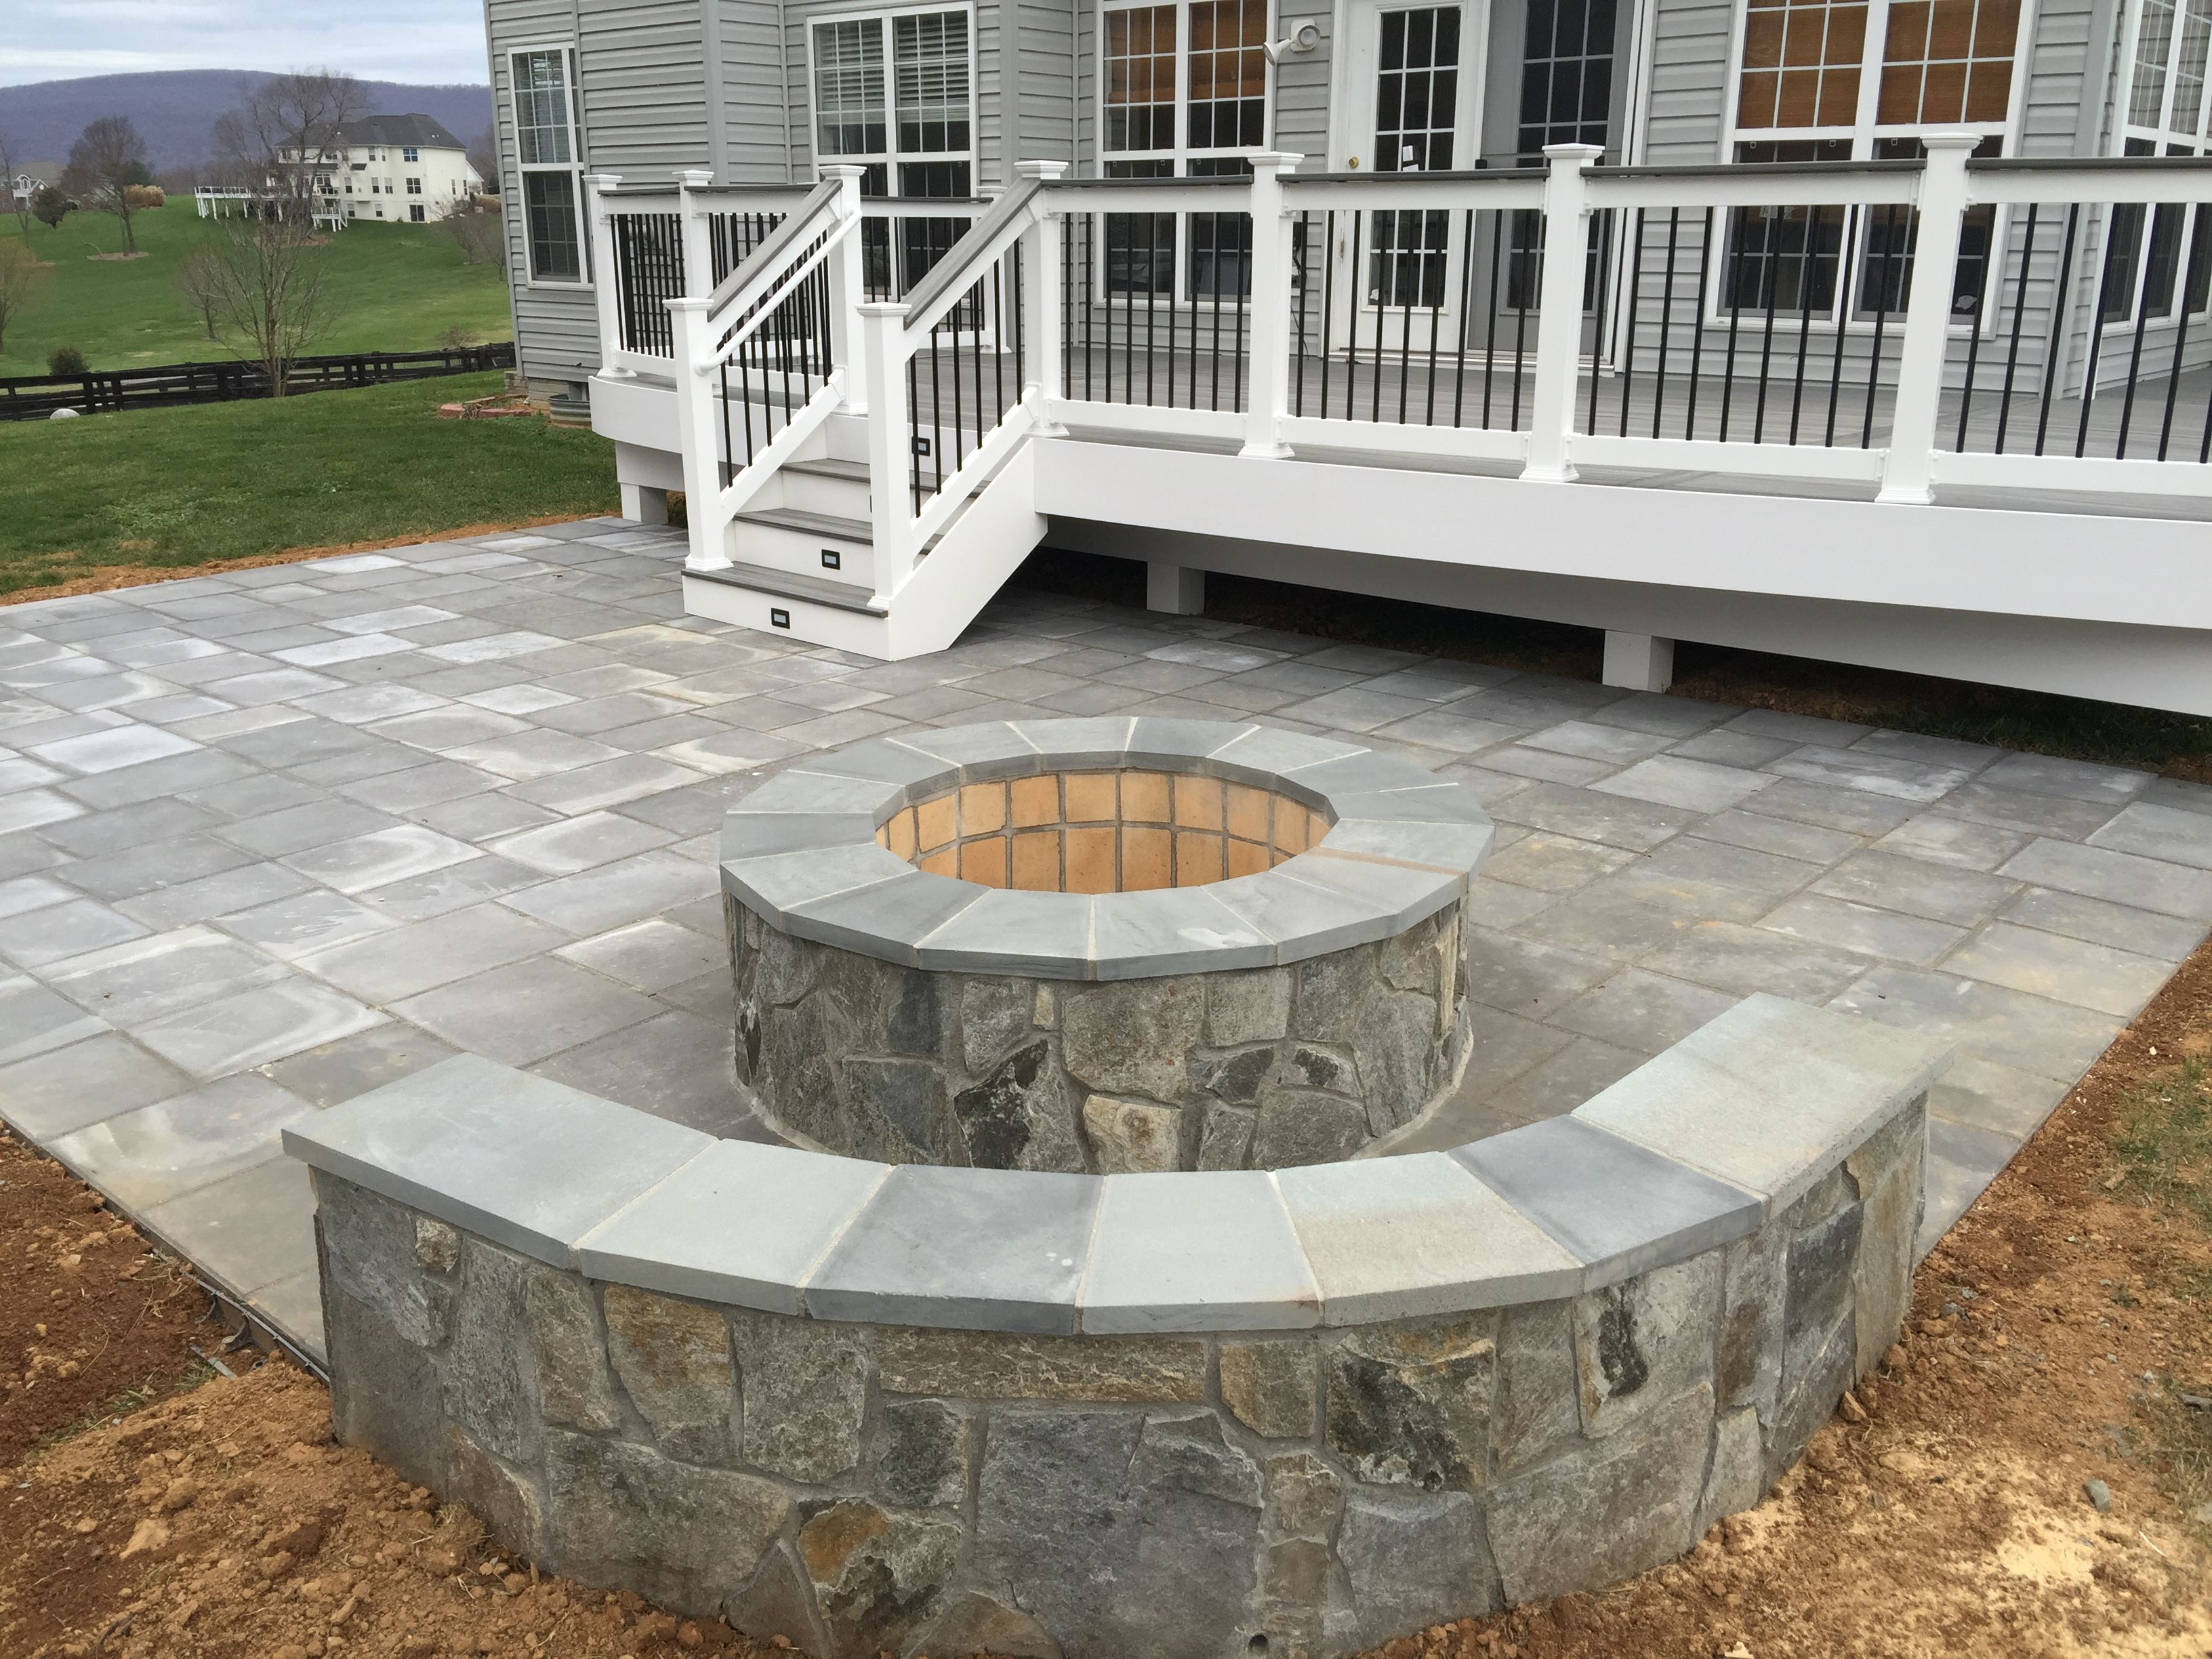 A Beautiful Paver Patio With Stone Seating Walls And A Fire within sizing 3264 X 2448